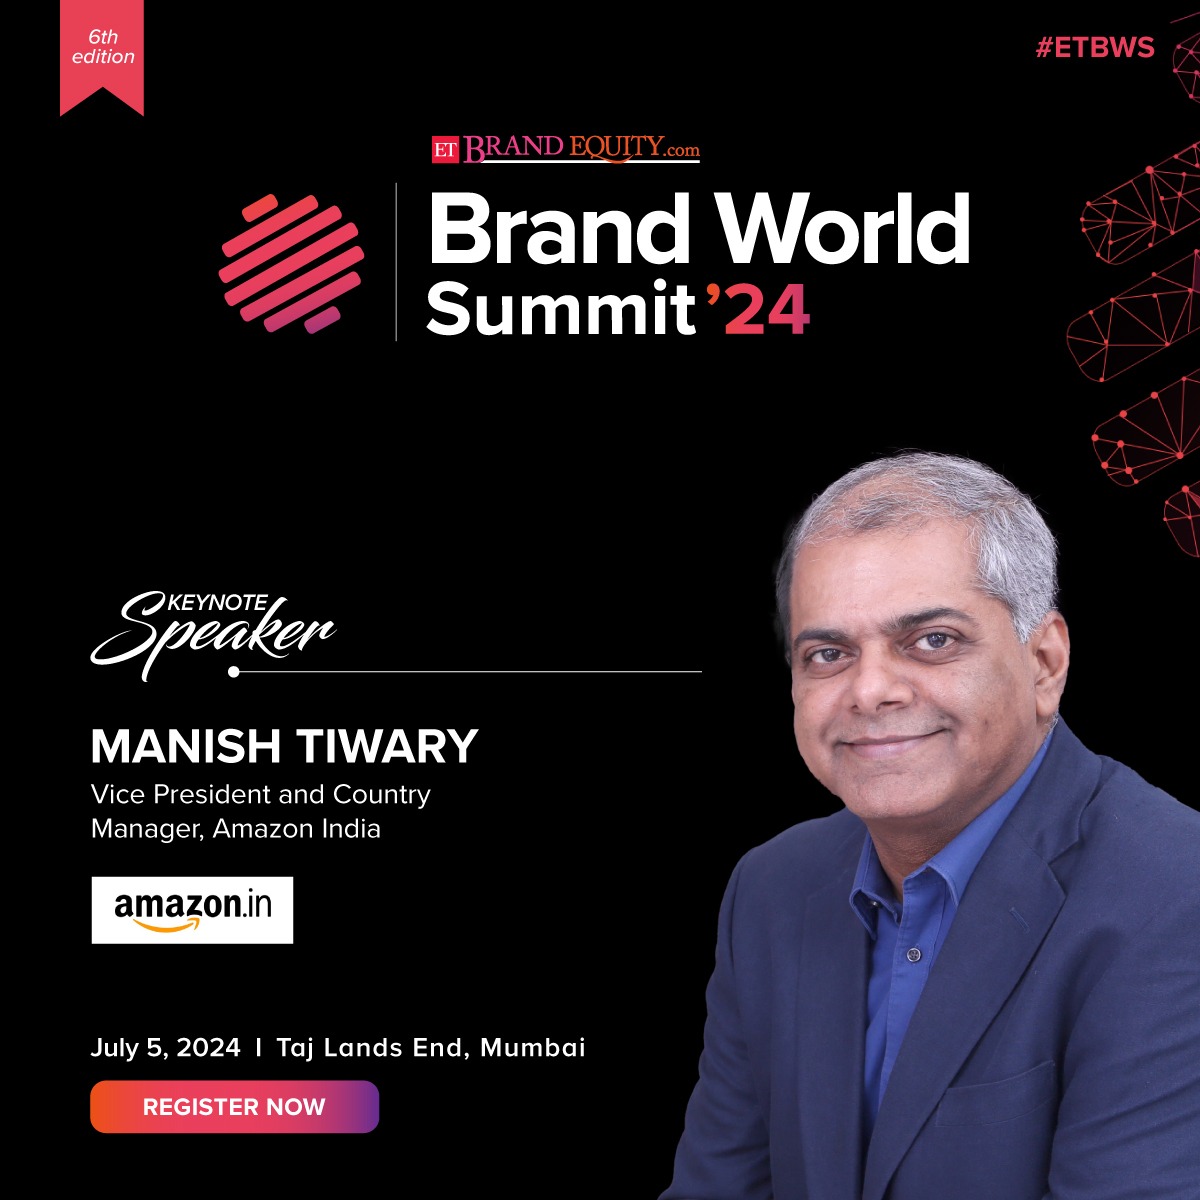 We're delighted to announce Manish Tiwary, Vice President and Country Manager at Amazon India, as our esteemed Keynote Speaker for #ETBWS!🚀

Link: bit.ly/3UyDorD

#BusinessWorldSummit #IndustryInsights #LeadershipForum #BusinessInnovation #GlobalNetworking #Corporate